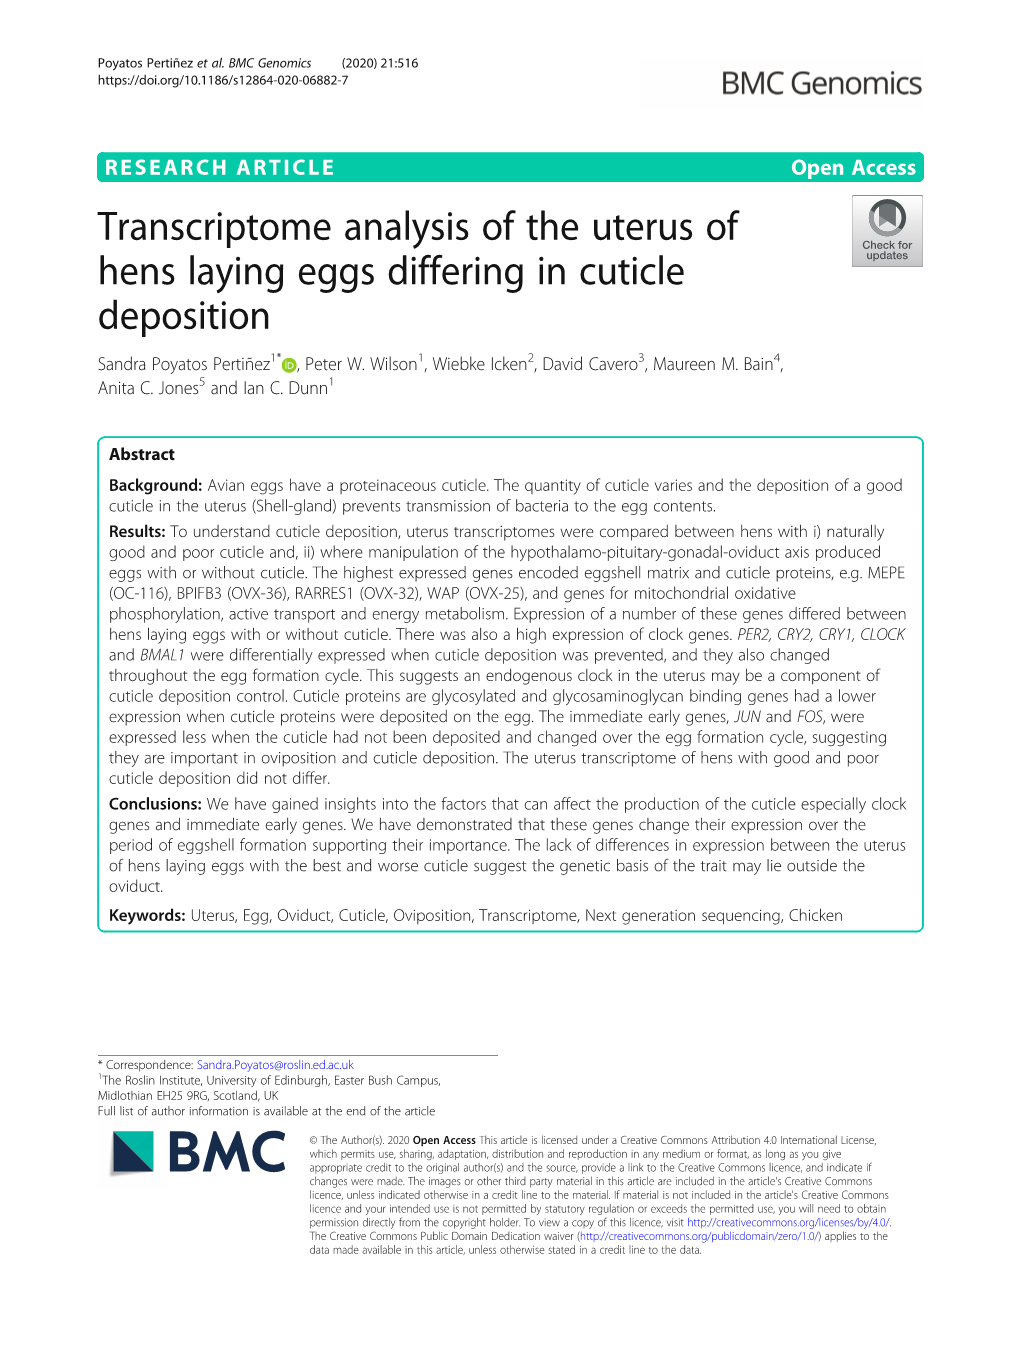 Transcriptome Analysis of the Uterus of Hens Laying Eggs Differing in Cuticle Deposition Sandra Poyatos Pertiñez1* , Peter W